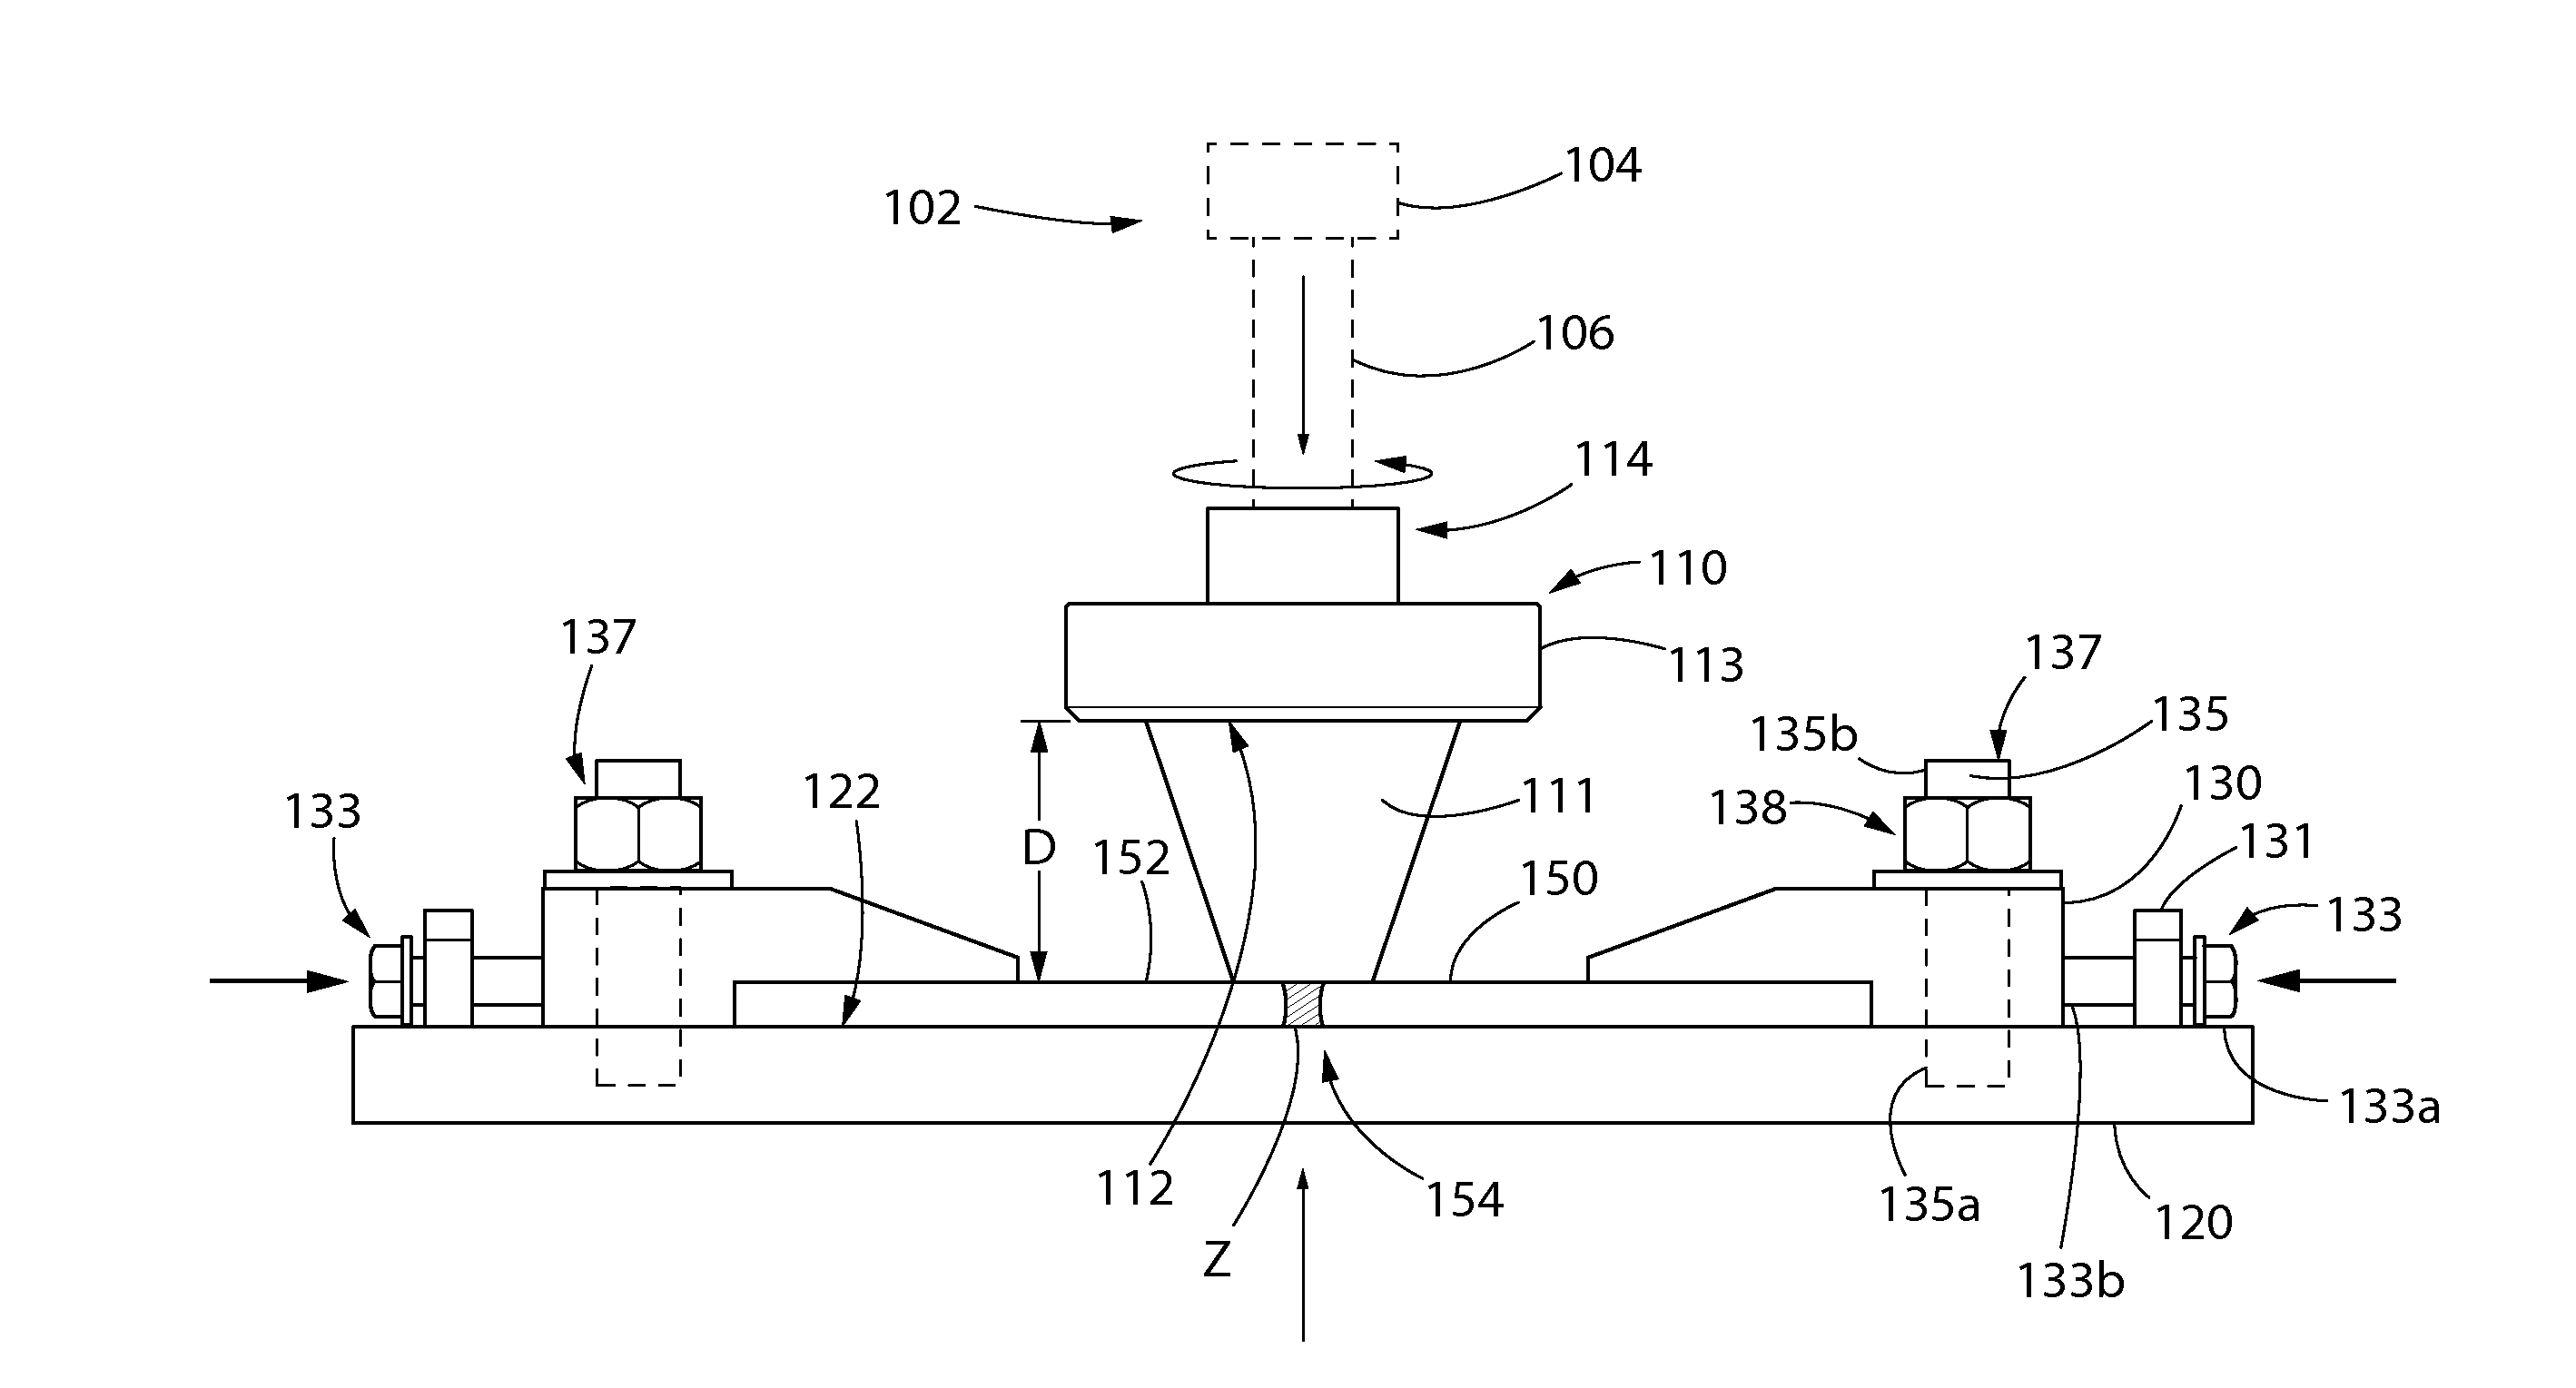 Joining process for neutron absorbing materials